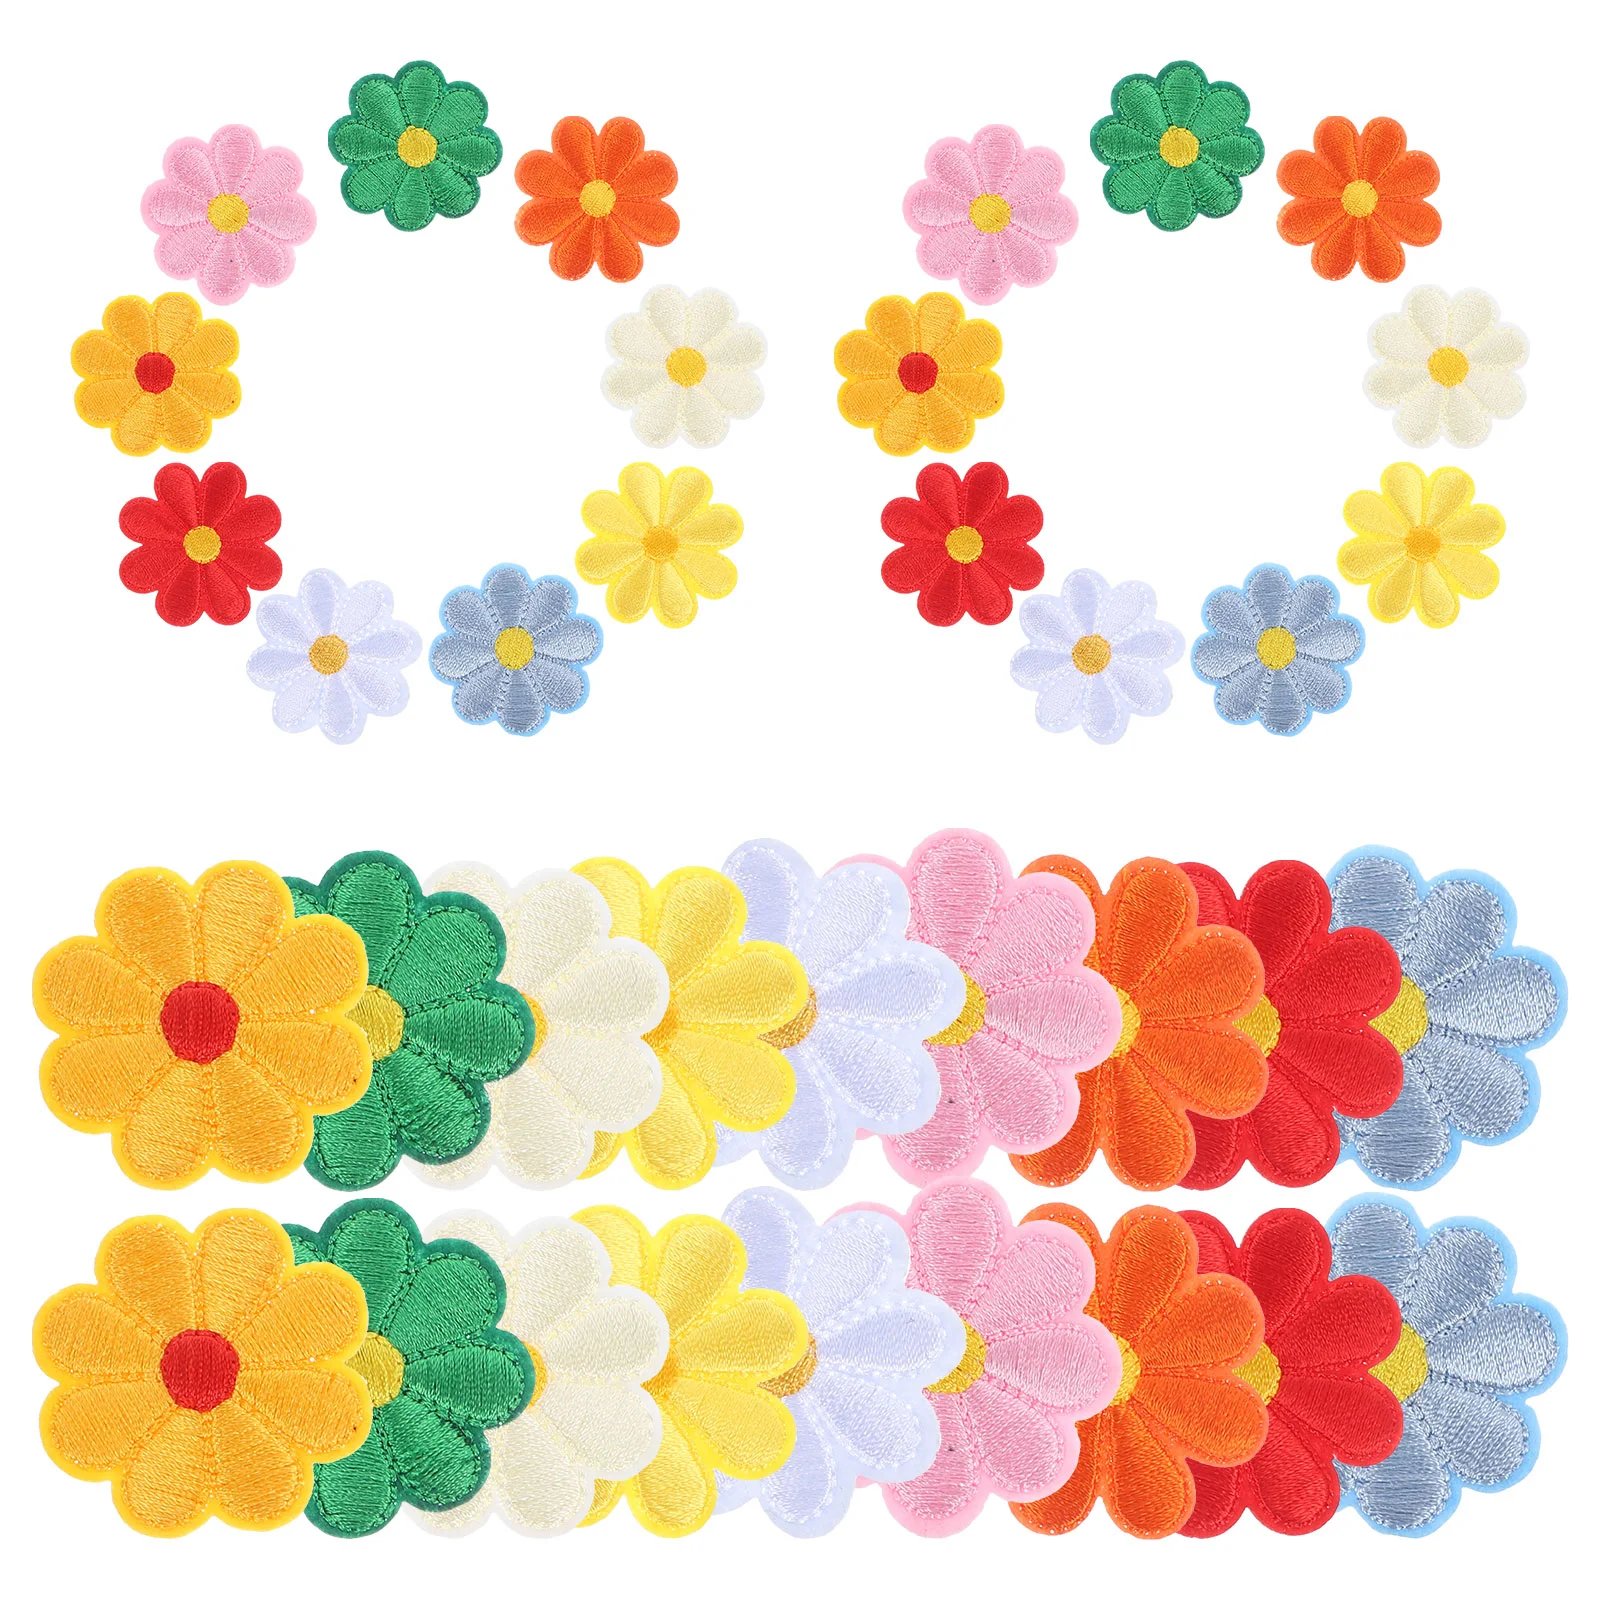 

36Pcs Sew On Patches Flower Patches Small Repairing Patches Clothes Iron On Patches DIY Patches